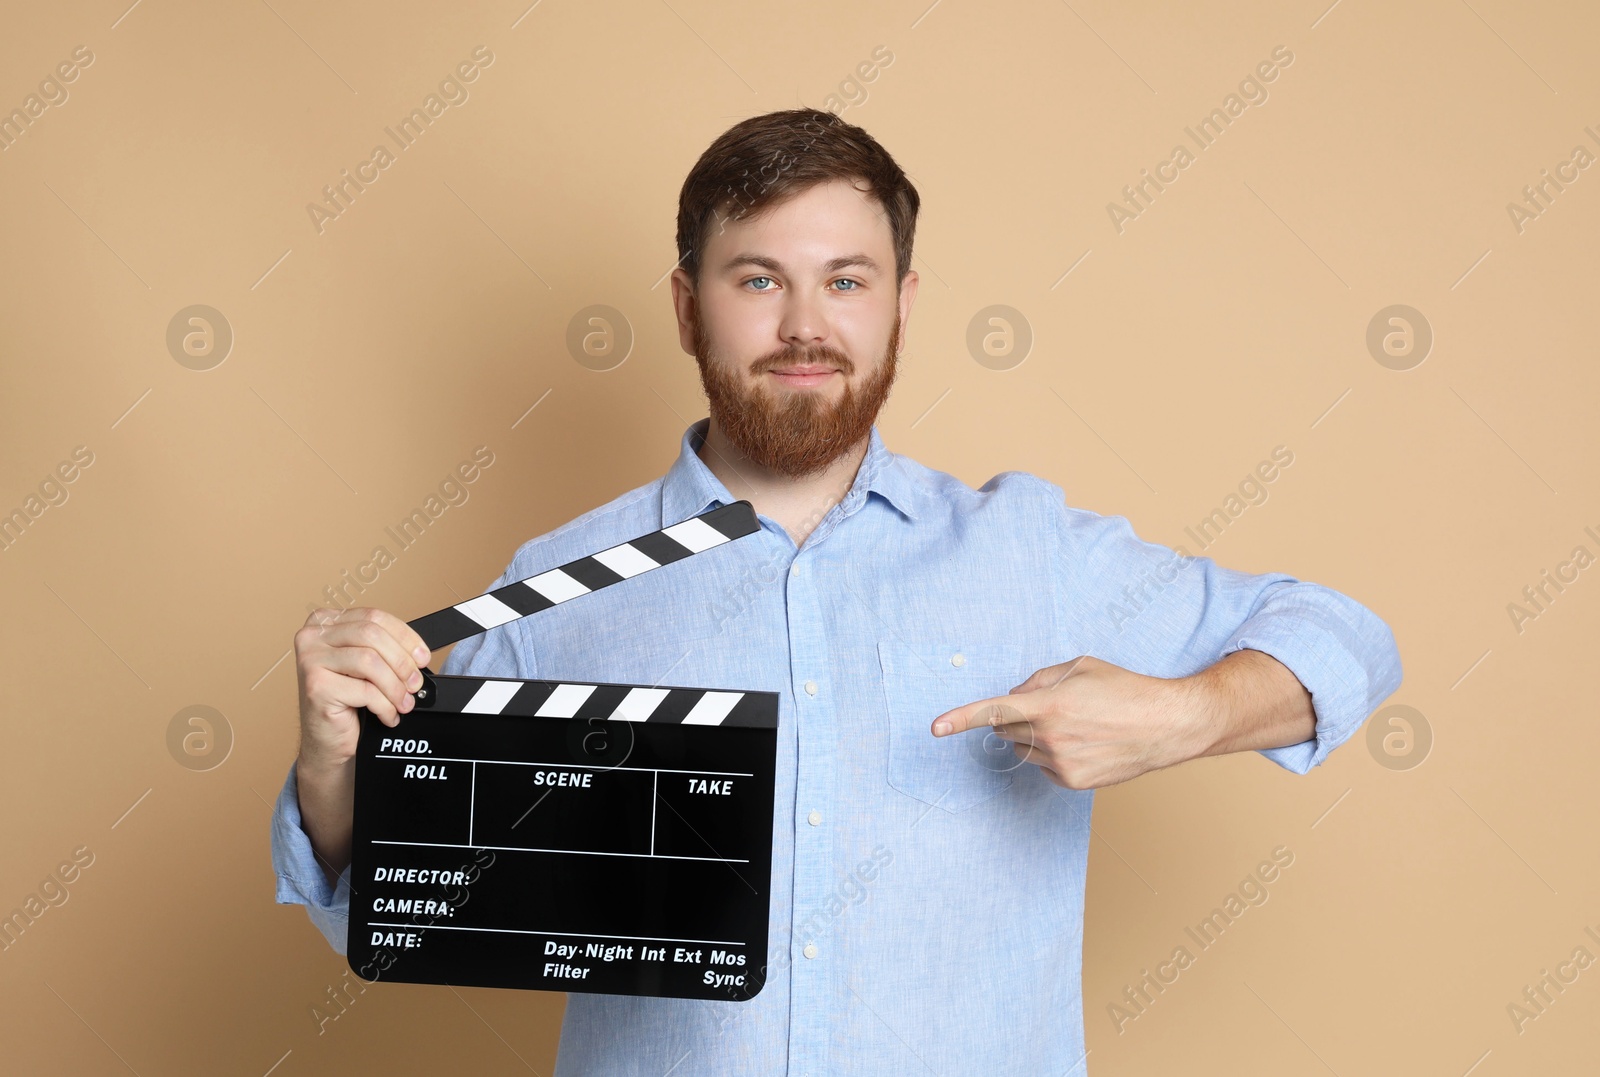 Photo of Making movie. Man pointing at clapperboard on beige background